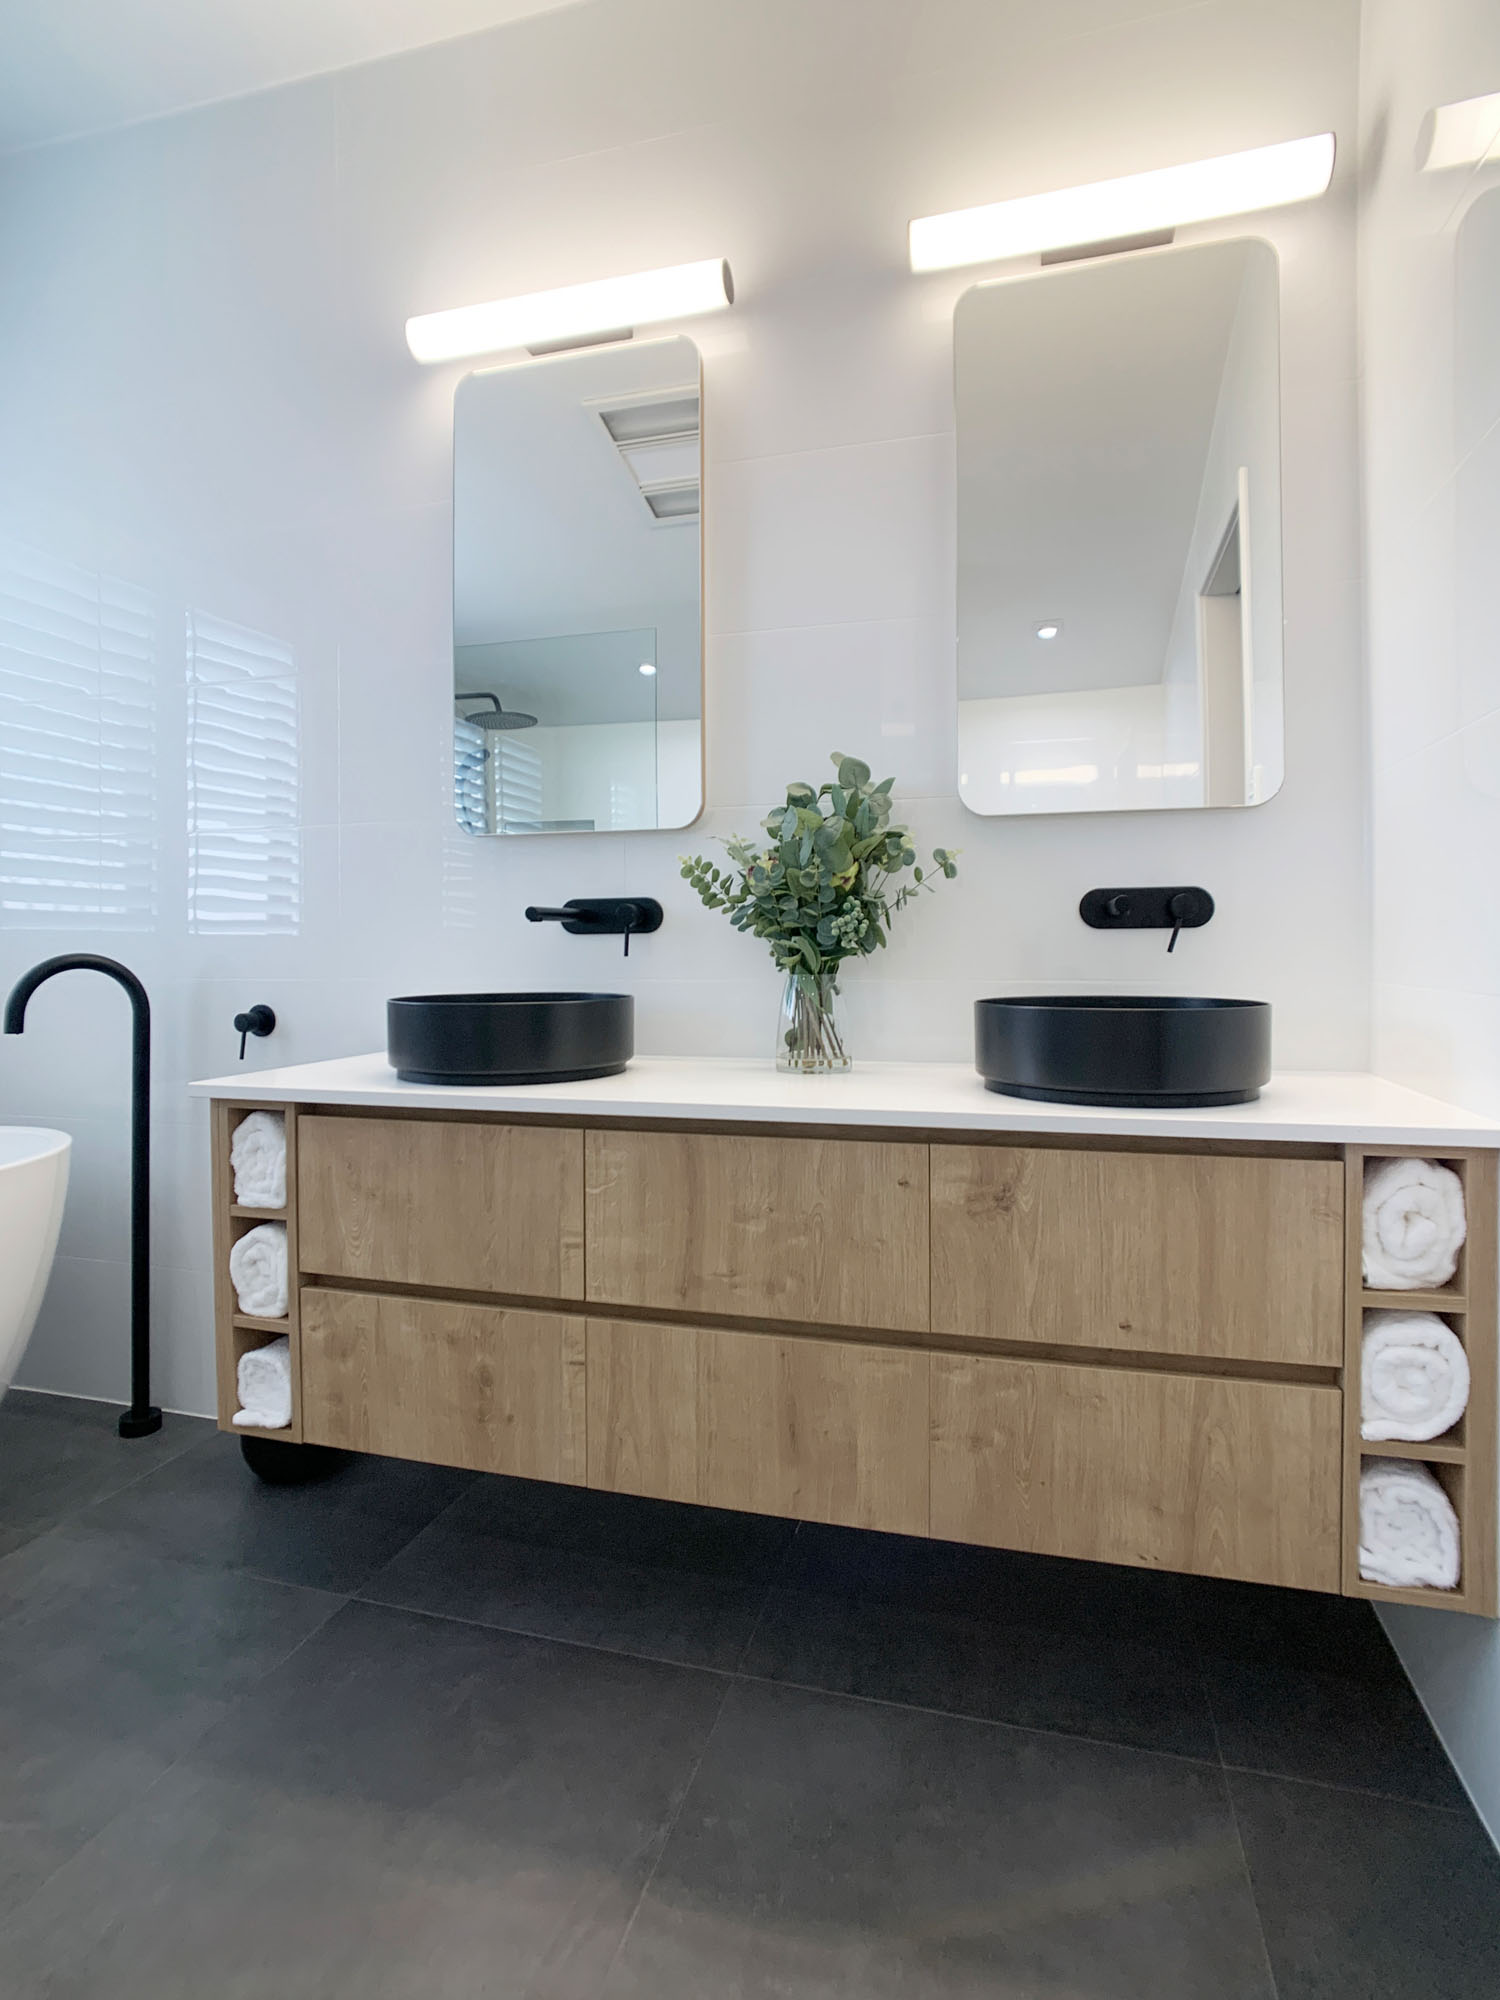 Dual Vanity & Shaving Cabinets - Overhead Lighting and Black Accessories